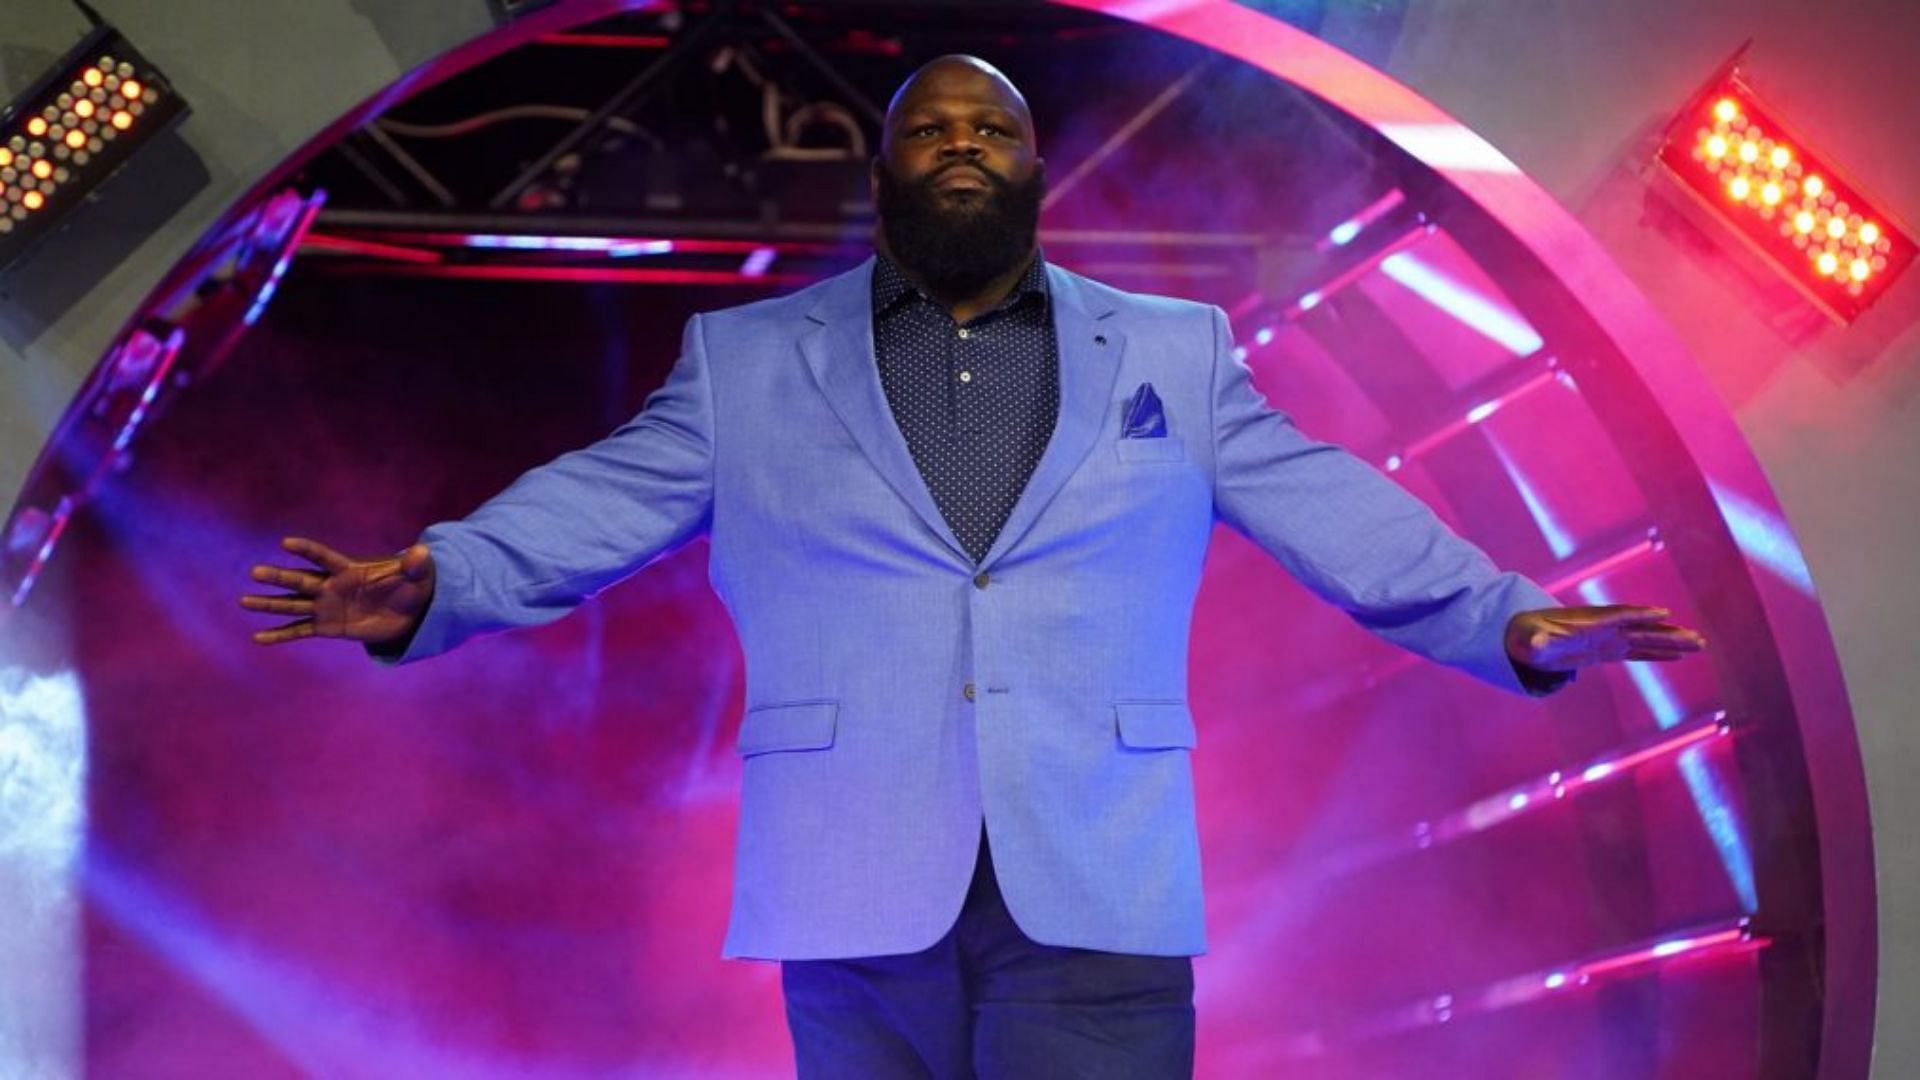 Why did Mark Henry leave WWE in 2021?